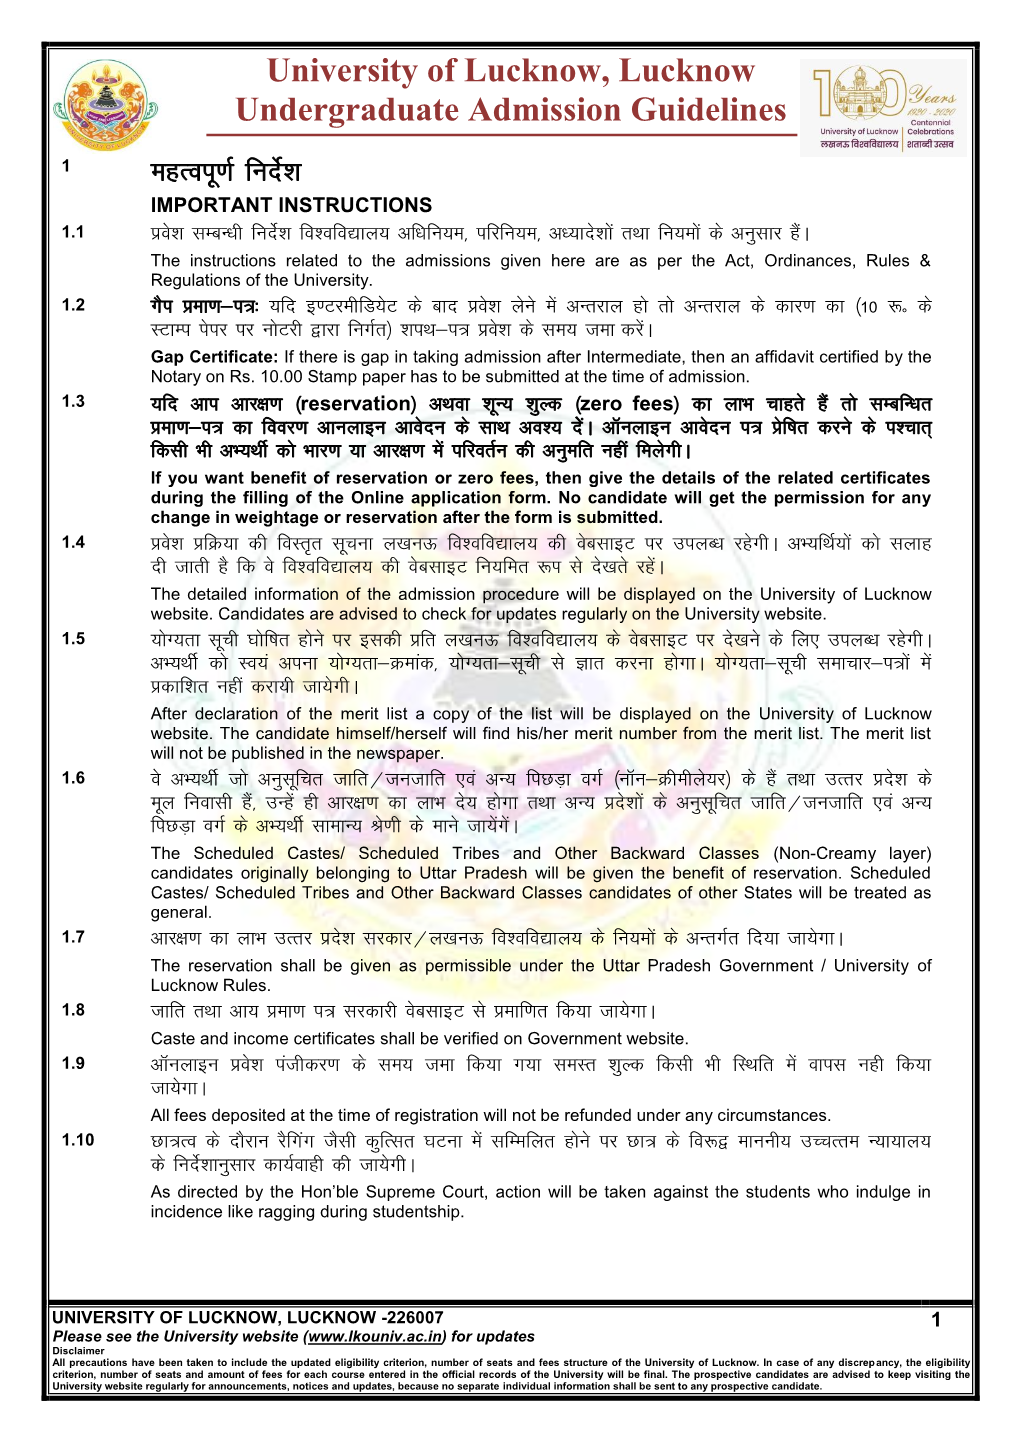 University of Lucknow, Lucknow Undergraduate Admission Guidelines